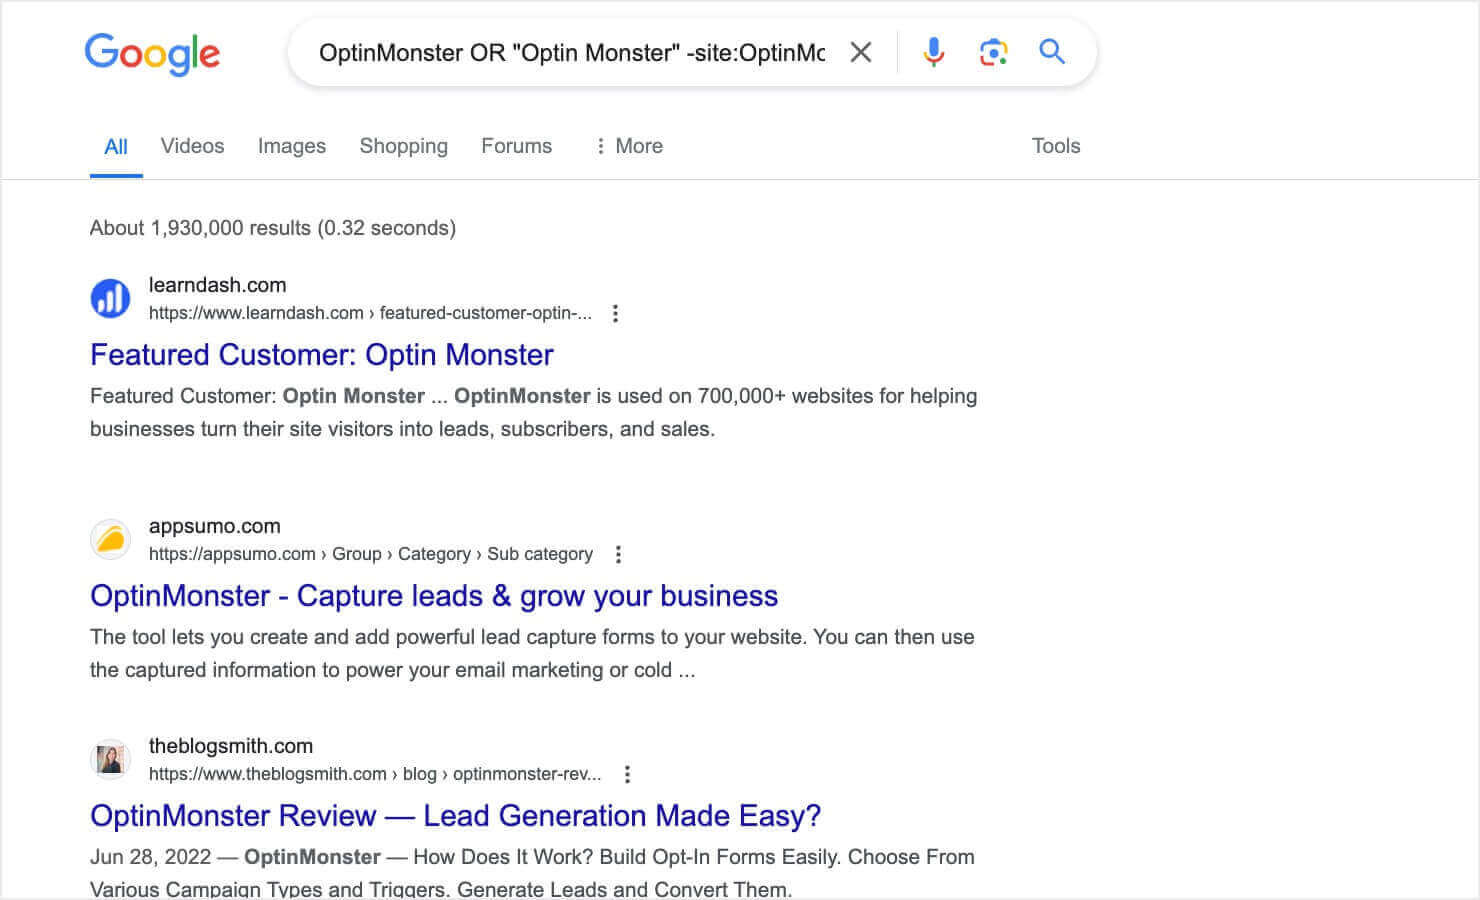 A Google search results page for the query that begins "OptinMonster OR 'Optin Monster." The results show various resources and articles about OptinMonster, including a featured customer case study from learndash.com